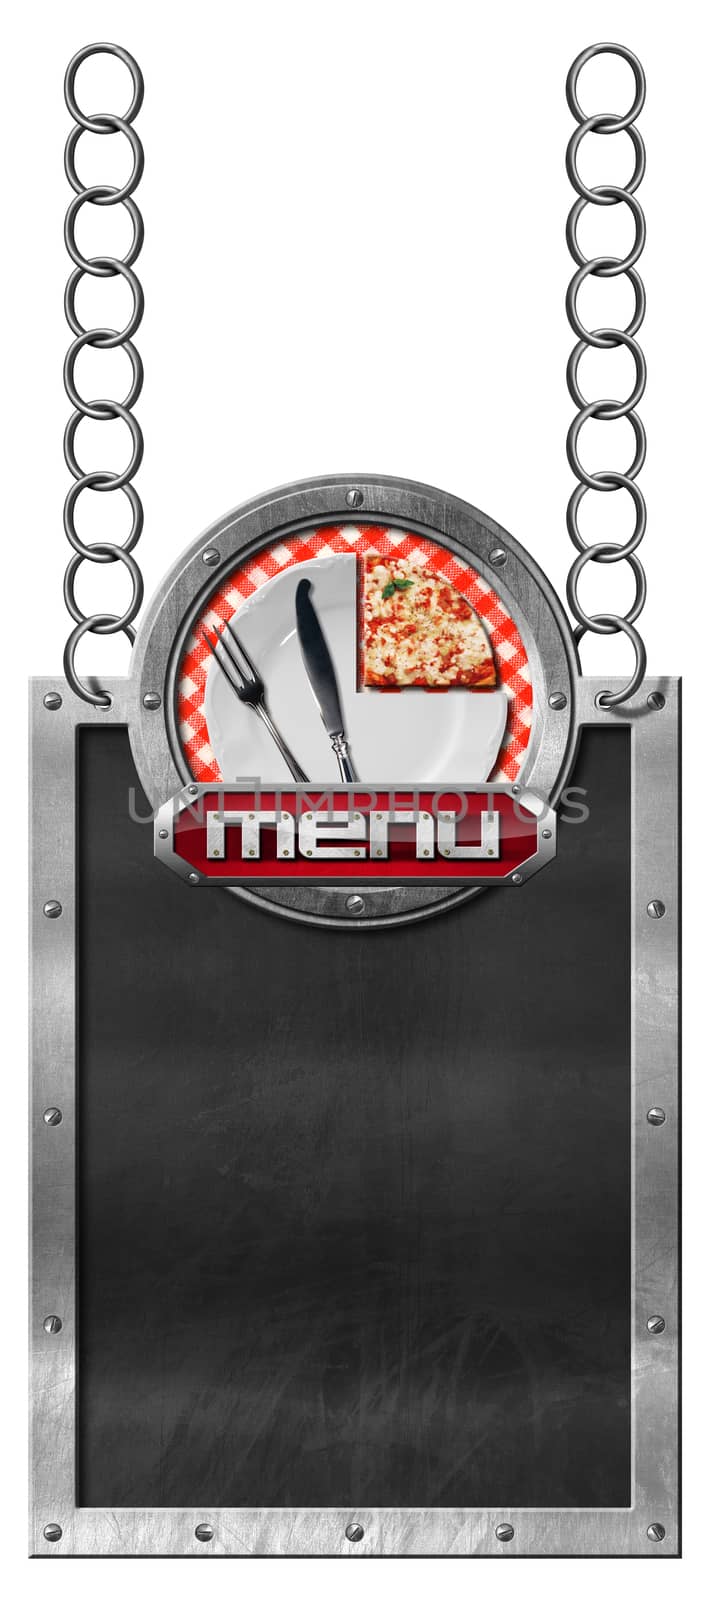 Empty blackboard with metal frame hanging from a metal chain, white plate with a slice of pizza and cutlery. Template for a pizza menu isolated on white
